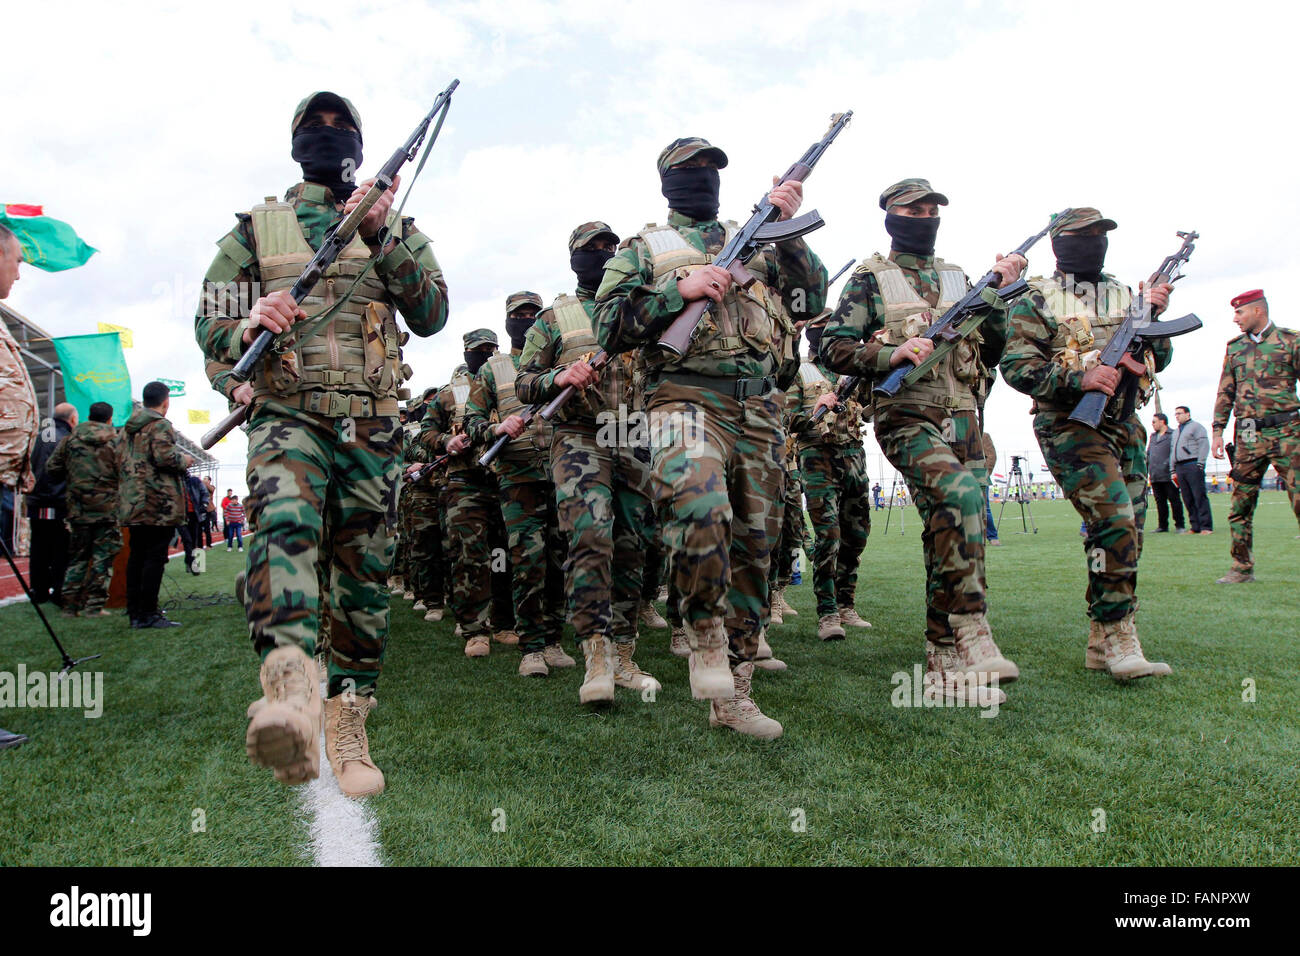 Kirkuk, Iraq. 2nd Jan, 2016. Fighters from Shiite paramilitary groups, known as Hashid Shaabi, or Popular Mobilization are reviewed in the end of their training period to fight Islamic State (IS) militants in a drill ground in Kirkuk, Iraq, Jan. 2, 2016. Credit:  Ako Zanagn/Xinhua/Alamy Live News Stock Photo